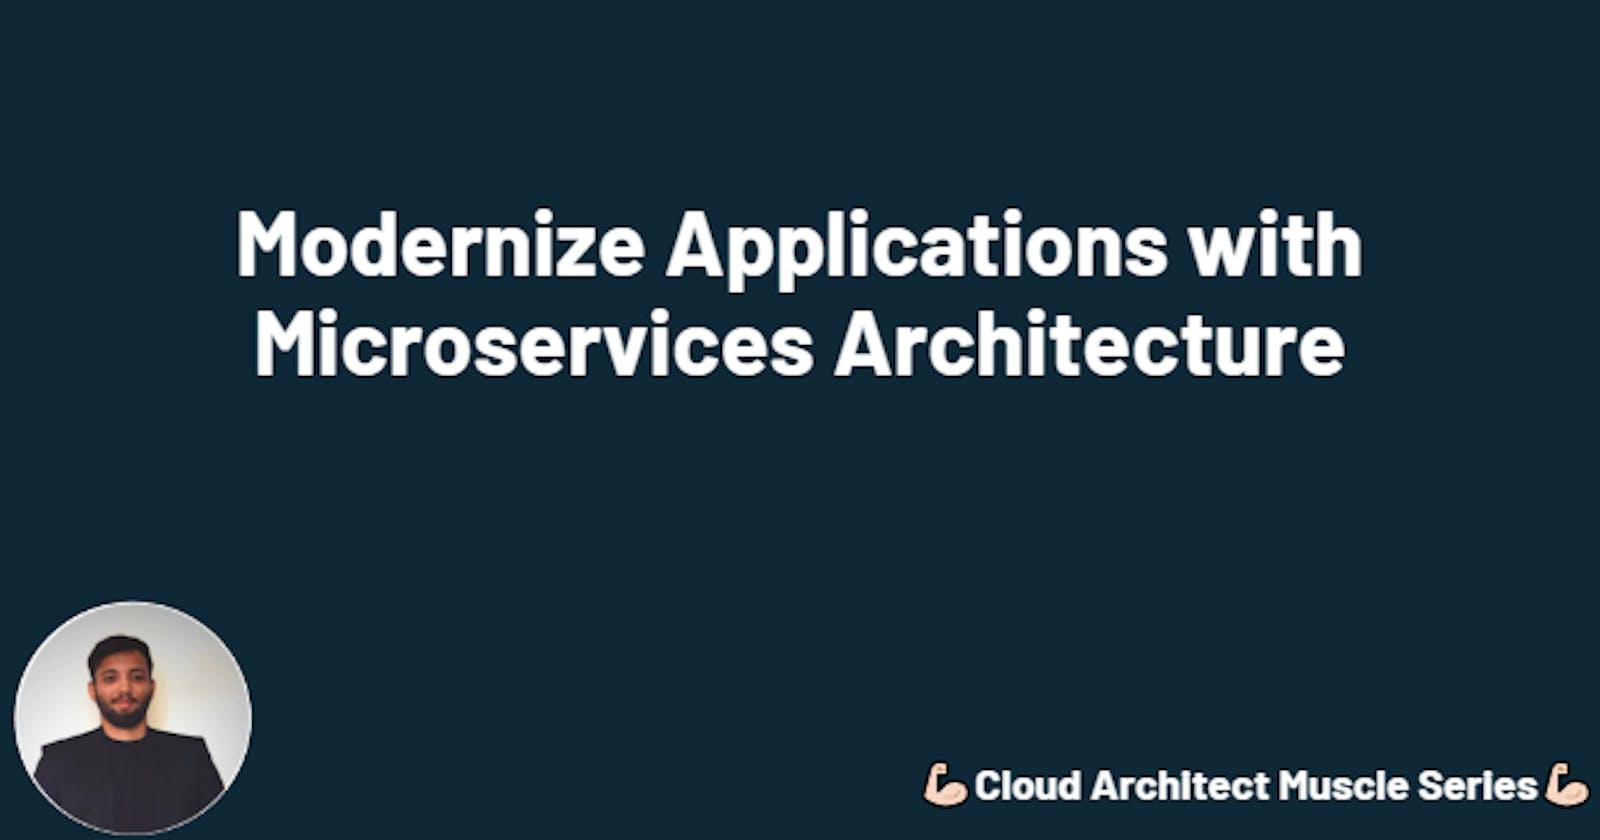 Modernize Applications with Microservices Architecture